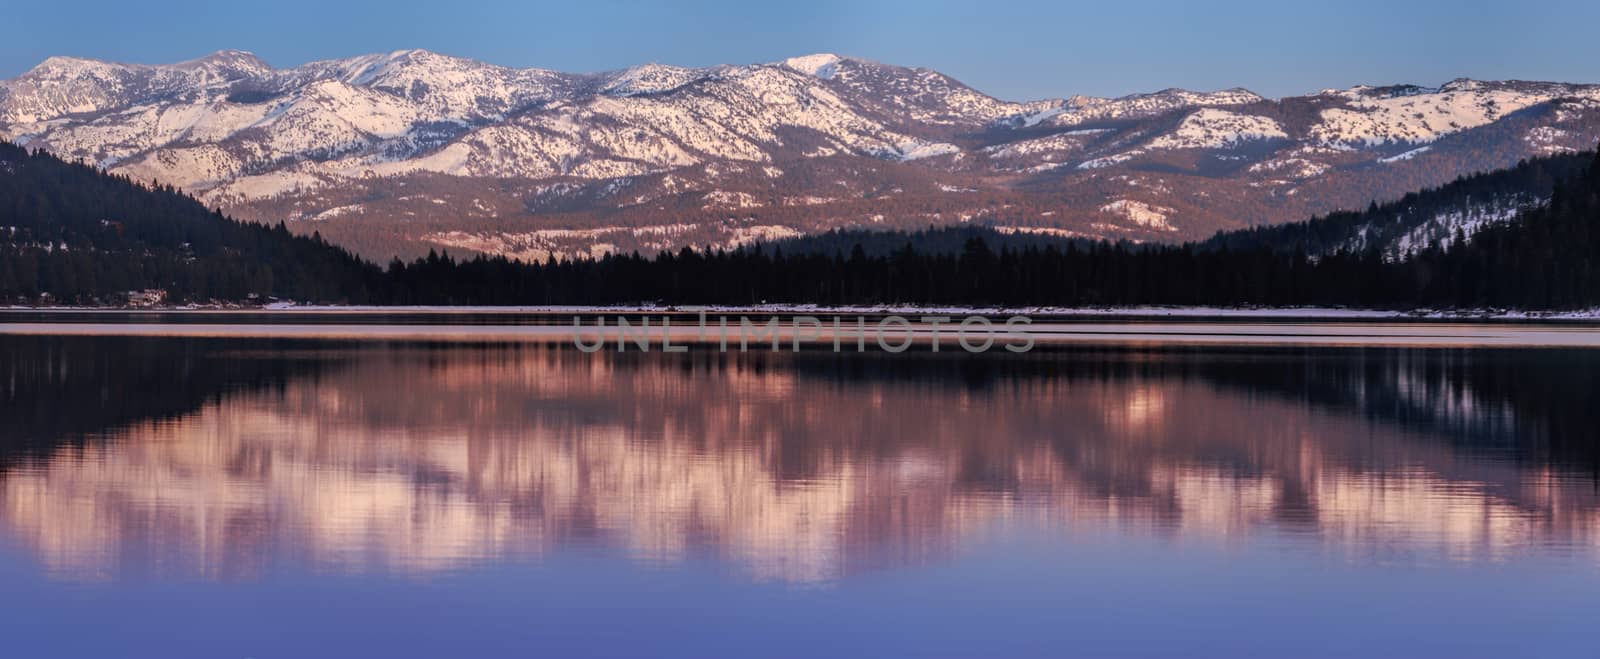 Panoramic view on Donner Lake at sunset in the winter with Mt. Houghton and Mt. Rose in the background.